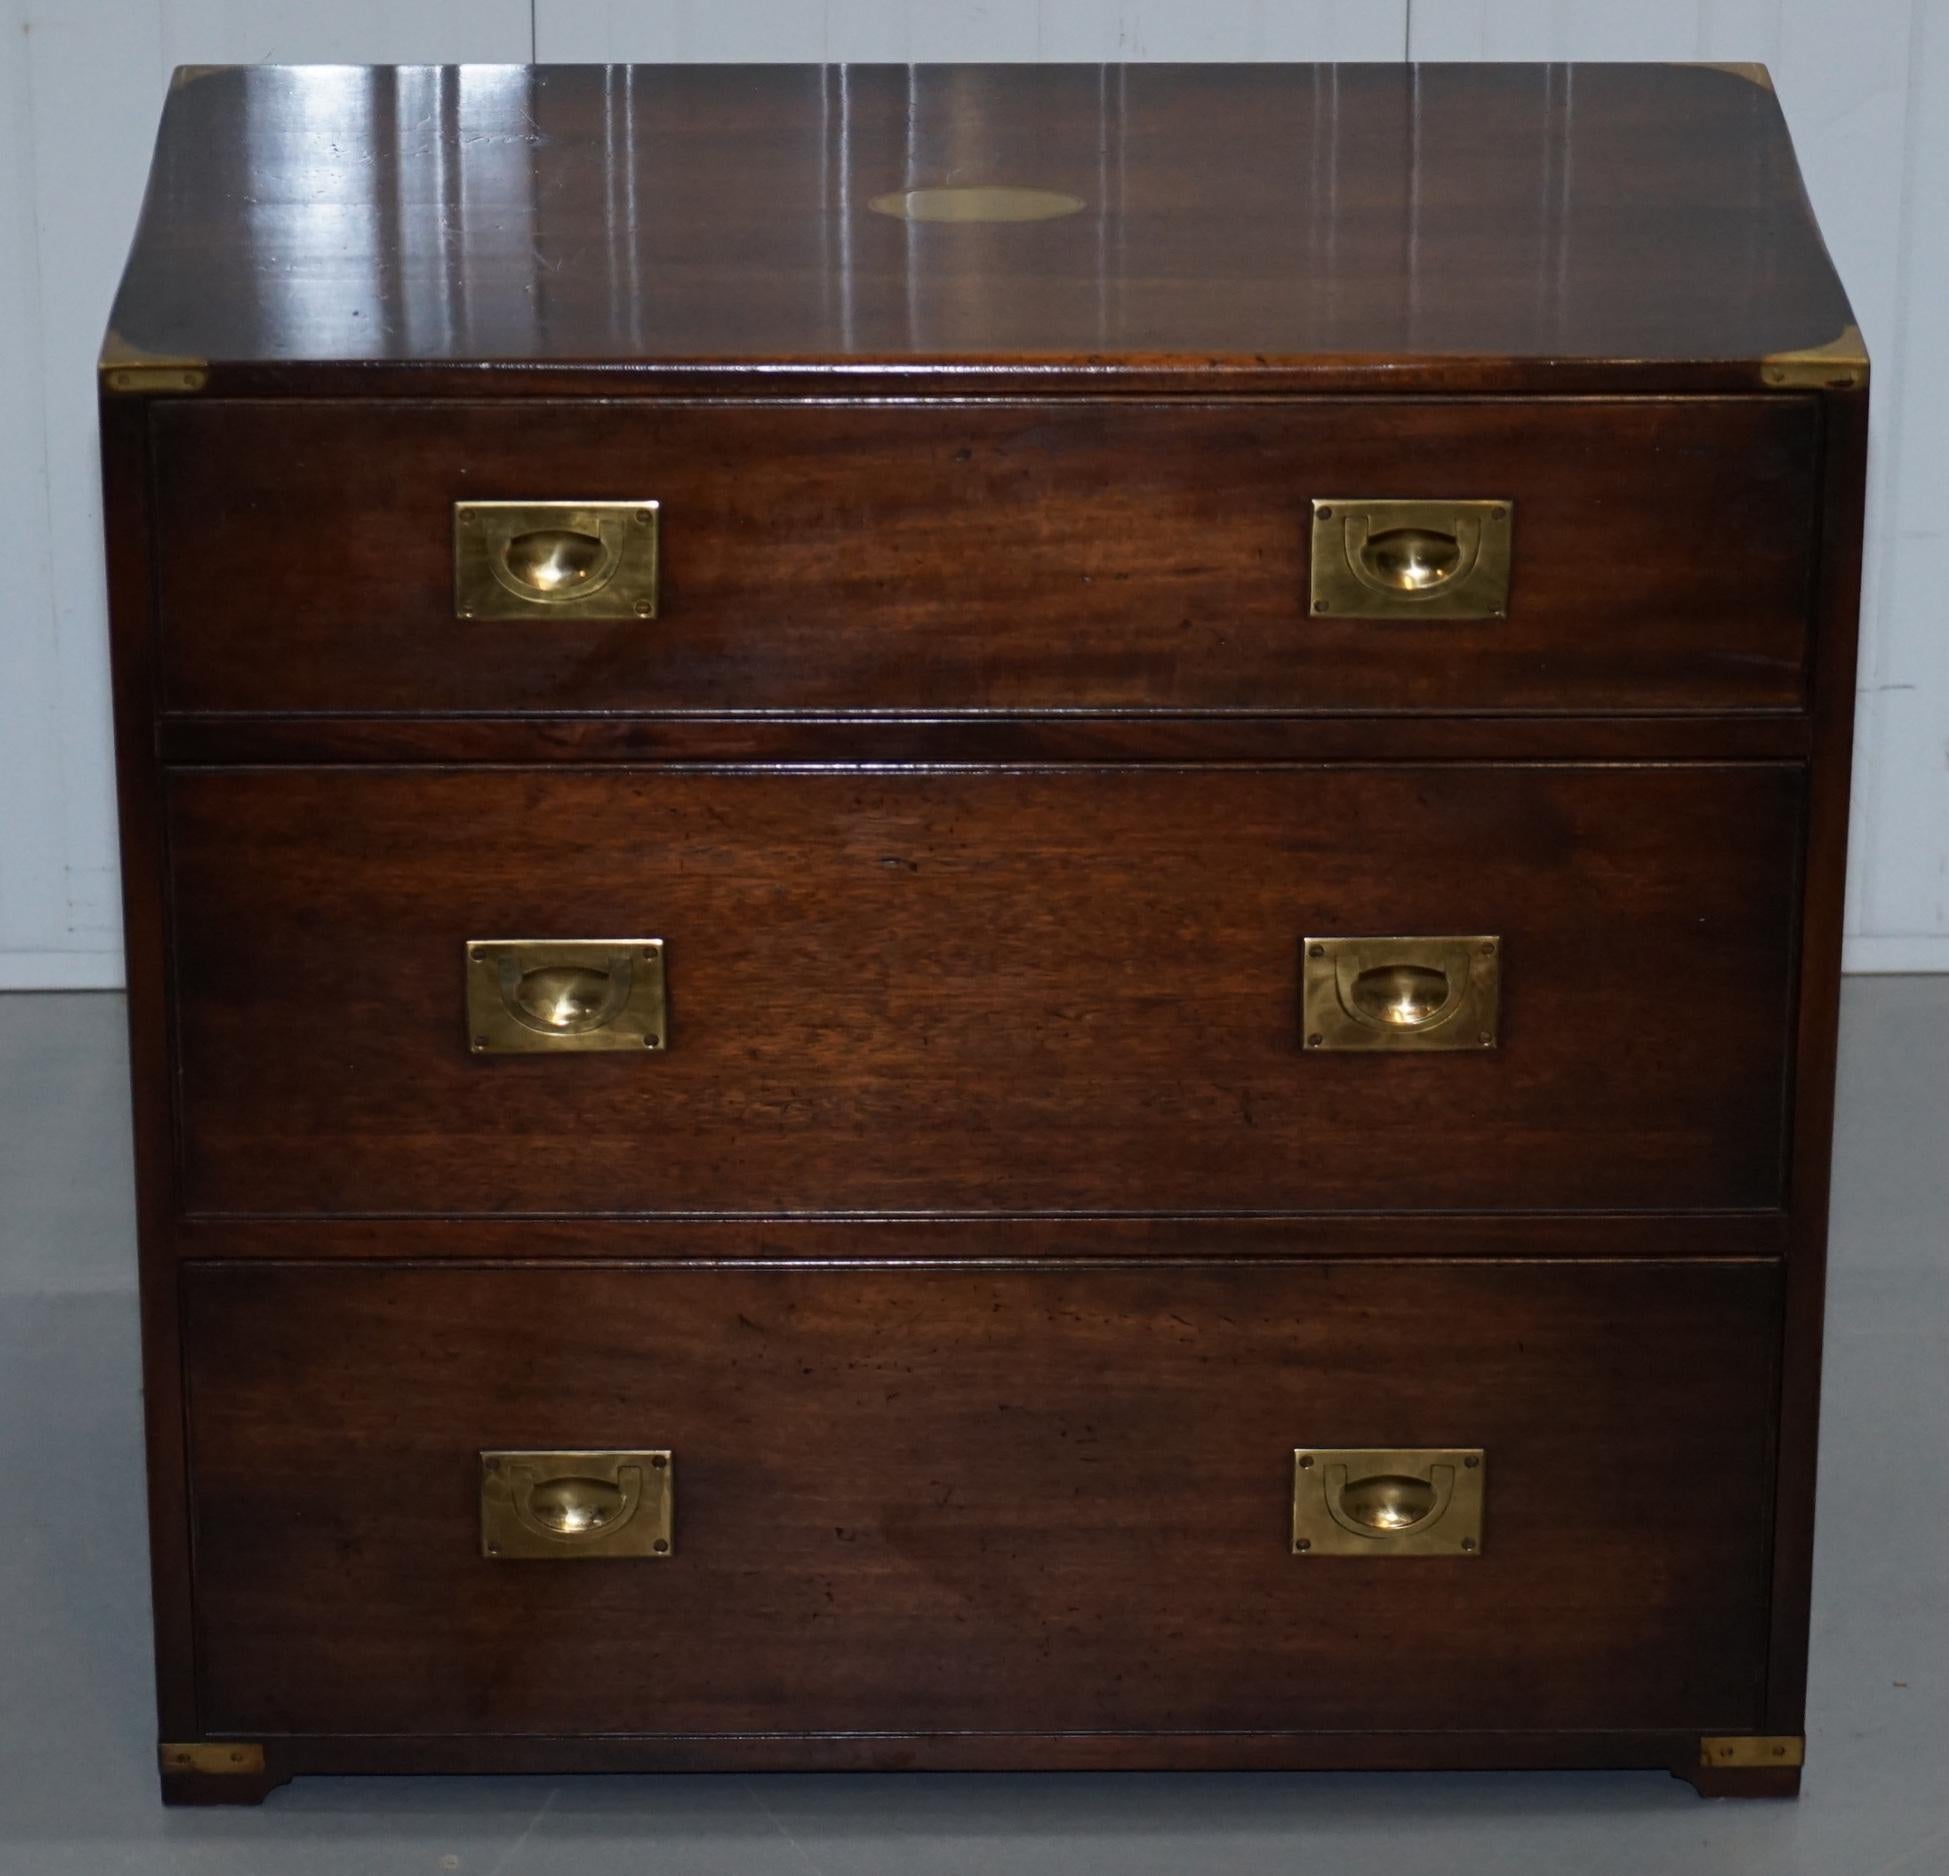 We are delighted to offer for sale this lovely Harrods London Kennedy military campaign chest of drawers

Please note the delivery fee listed is just a guide, it covers within the M25 only.

Kennedy Furniture is all handmade in Ipswich to order,